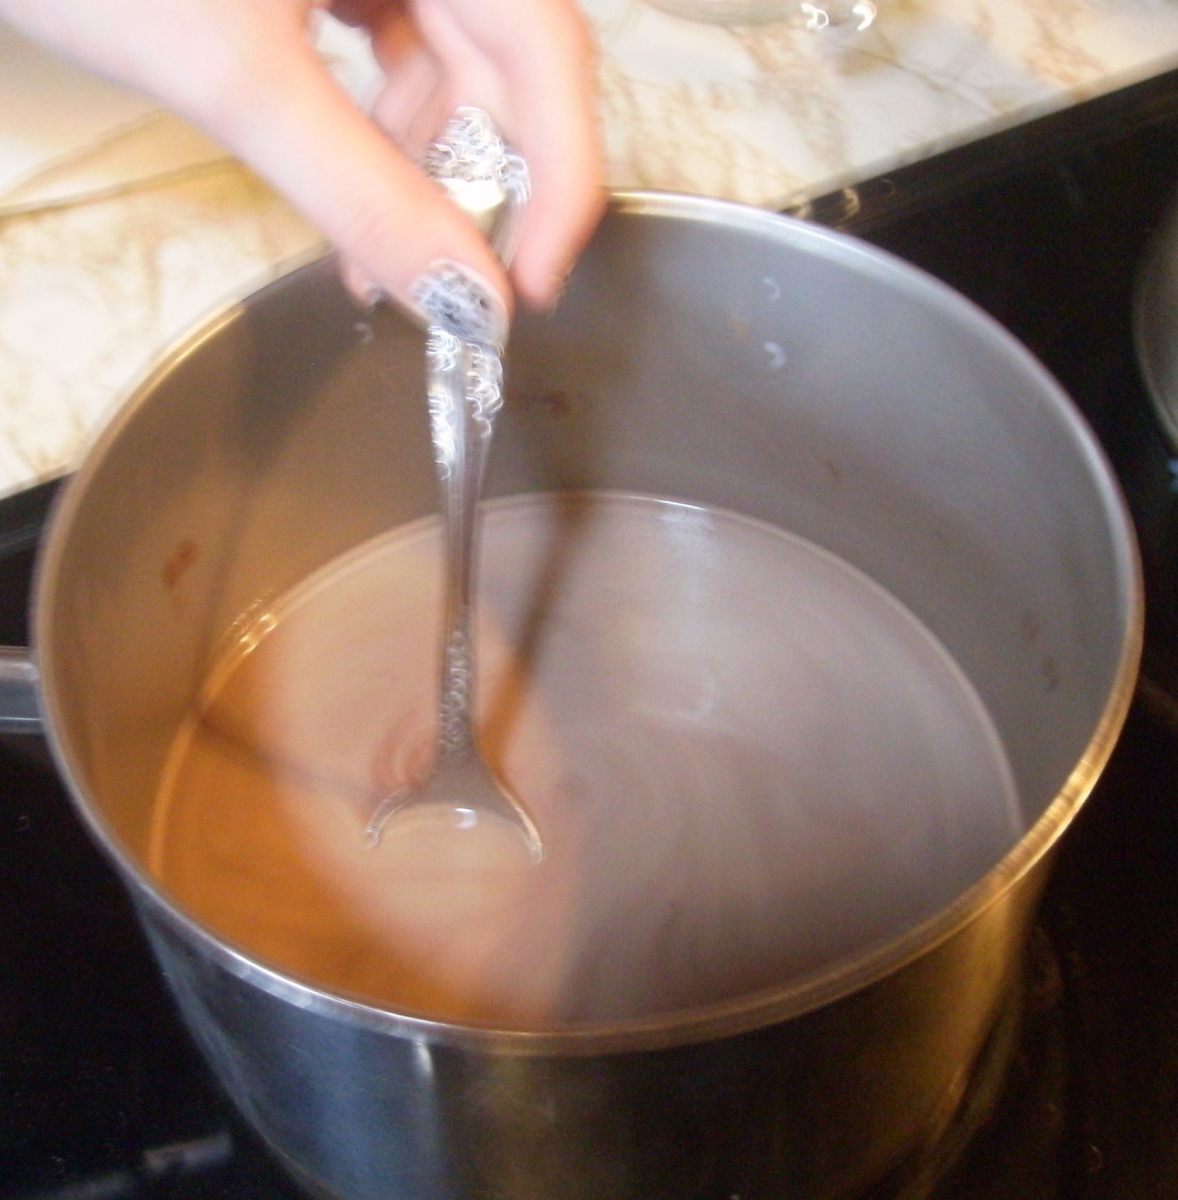 The blurry hand stirring the light-looking thin chocolate that will darken and thicken...